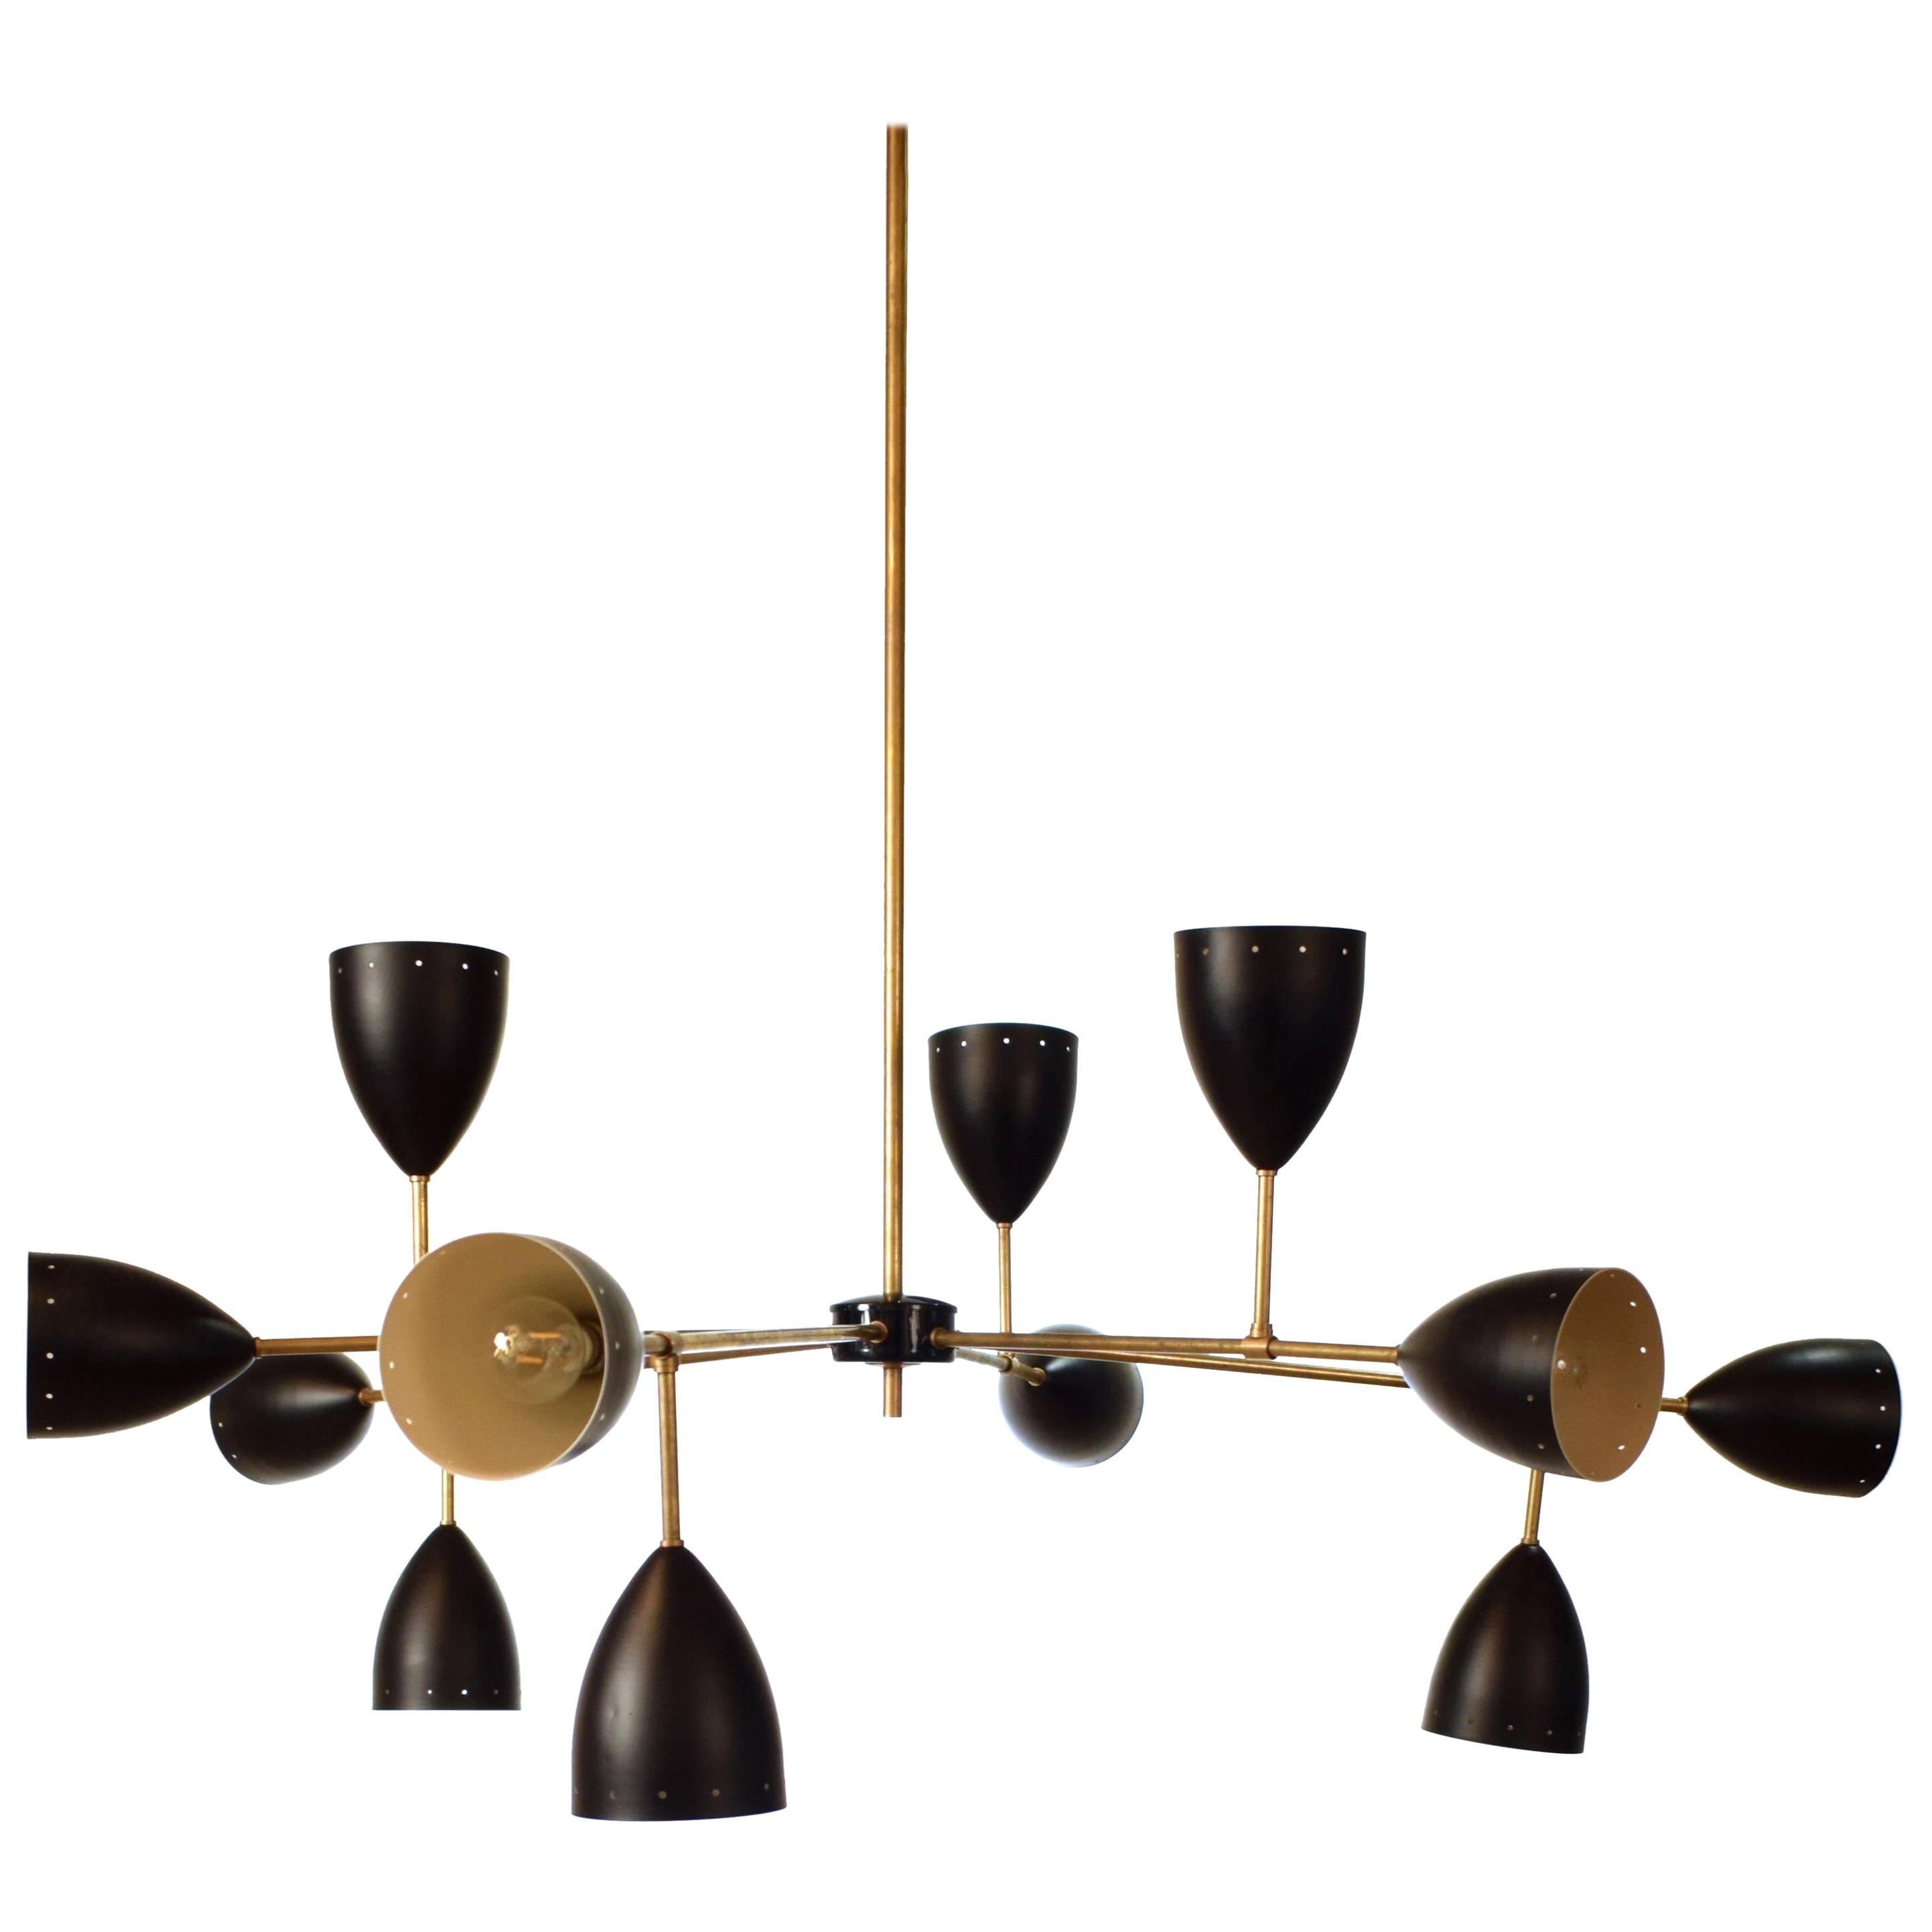 Large Mid-Century Style Stilnovo Chandelier in Brass and Black Lacquered Metal